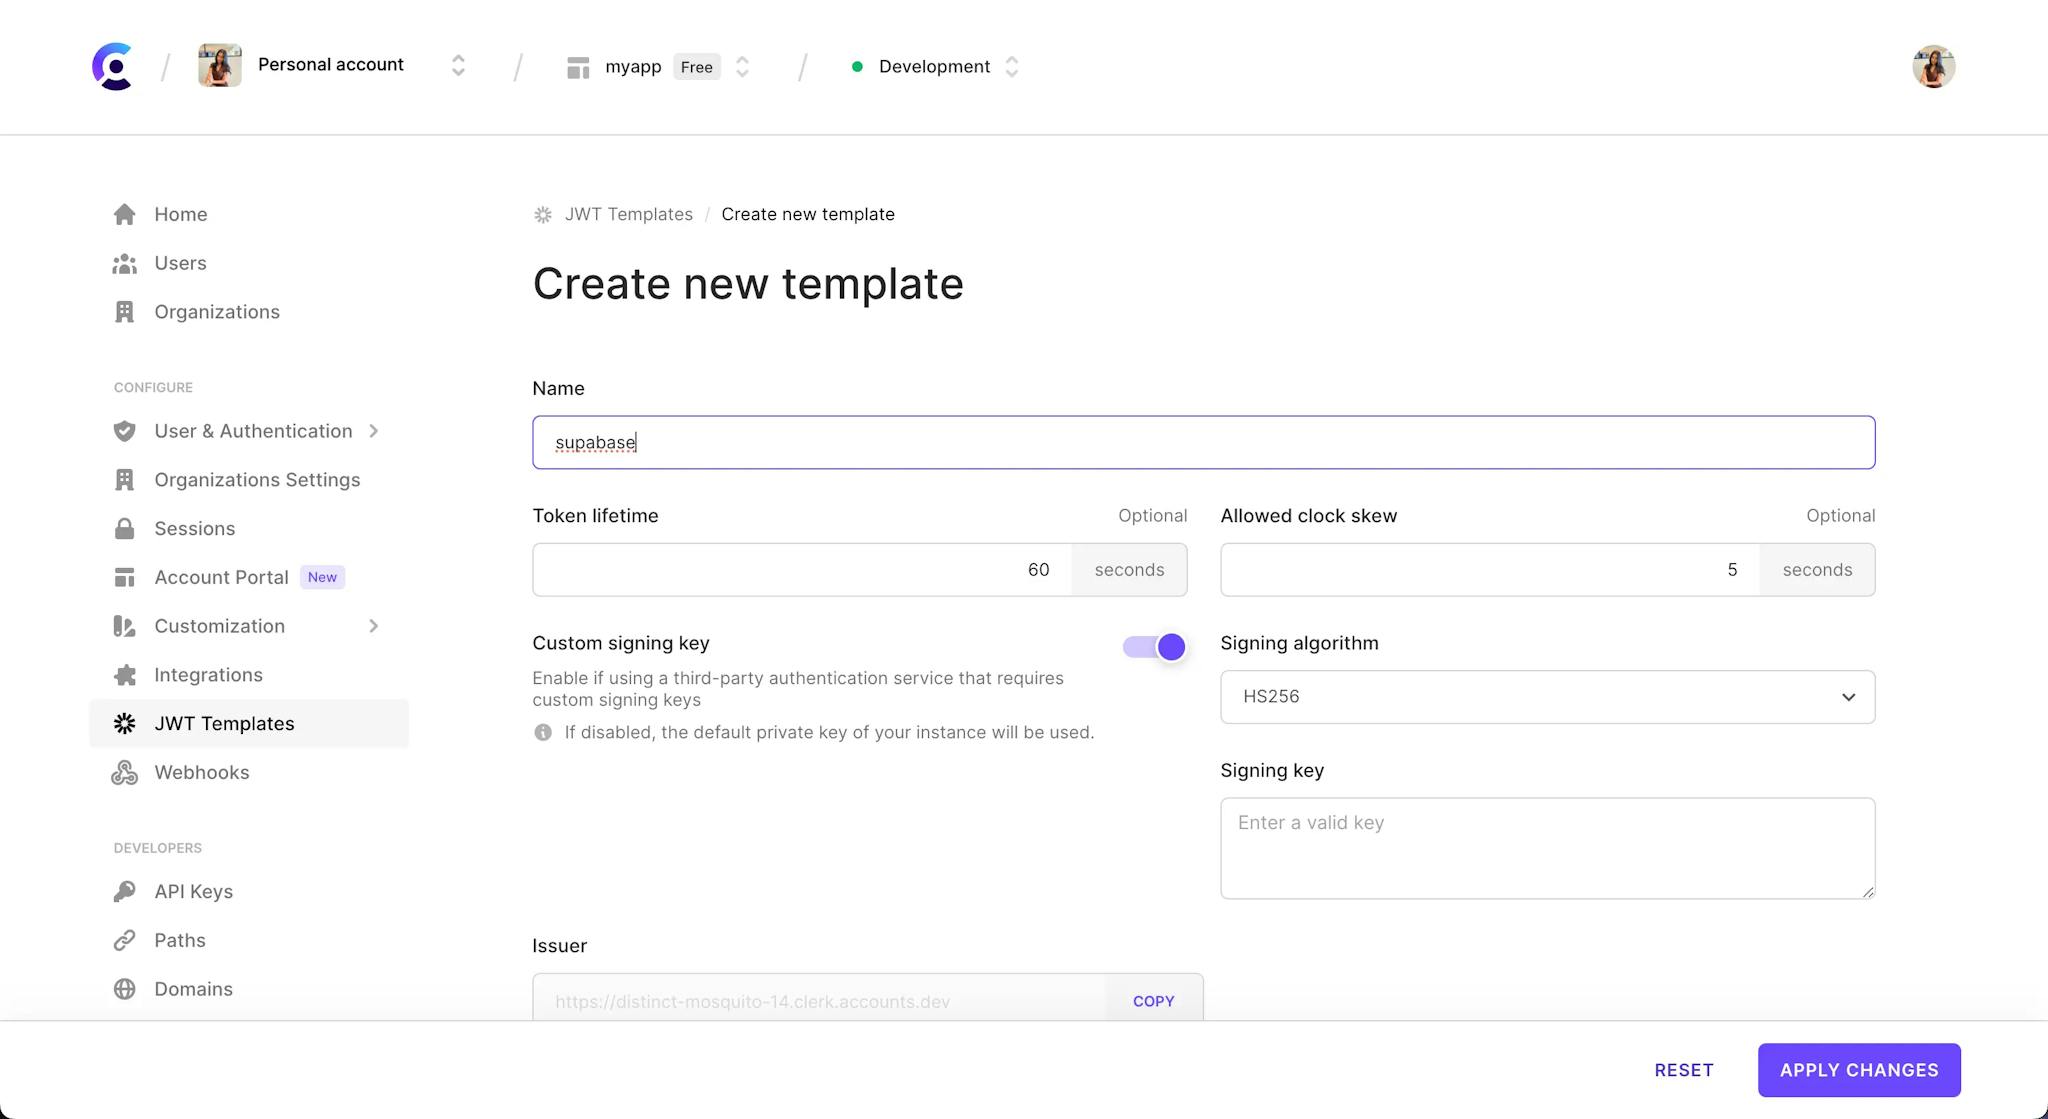 The 'Create new template' page of the JWT Templates page in the Clerk Dashboard.